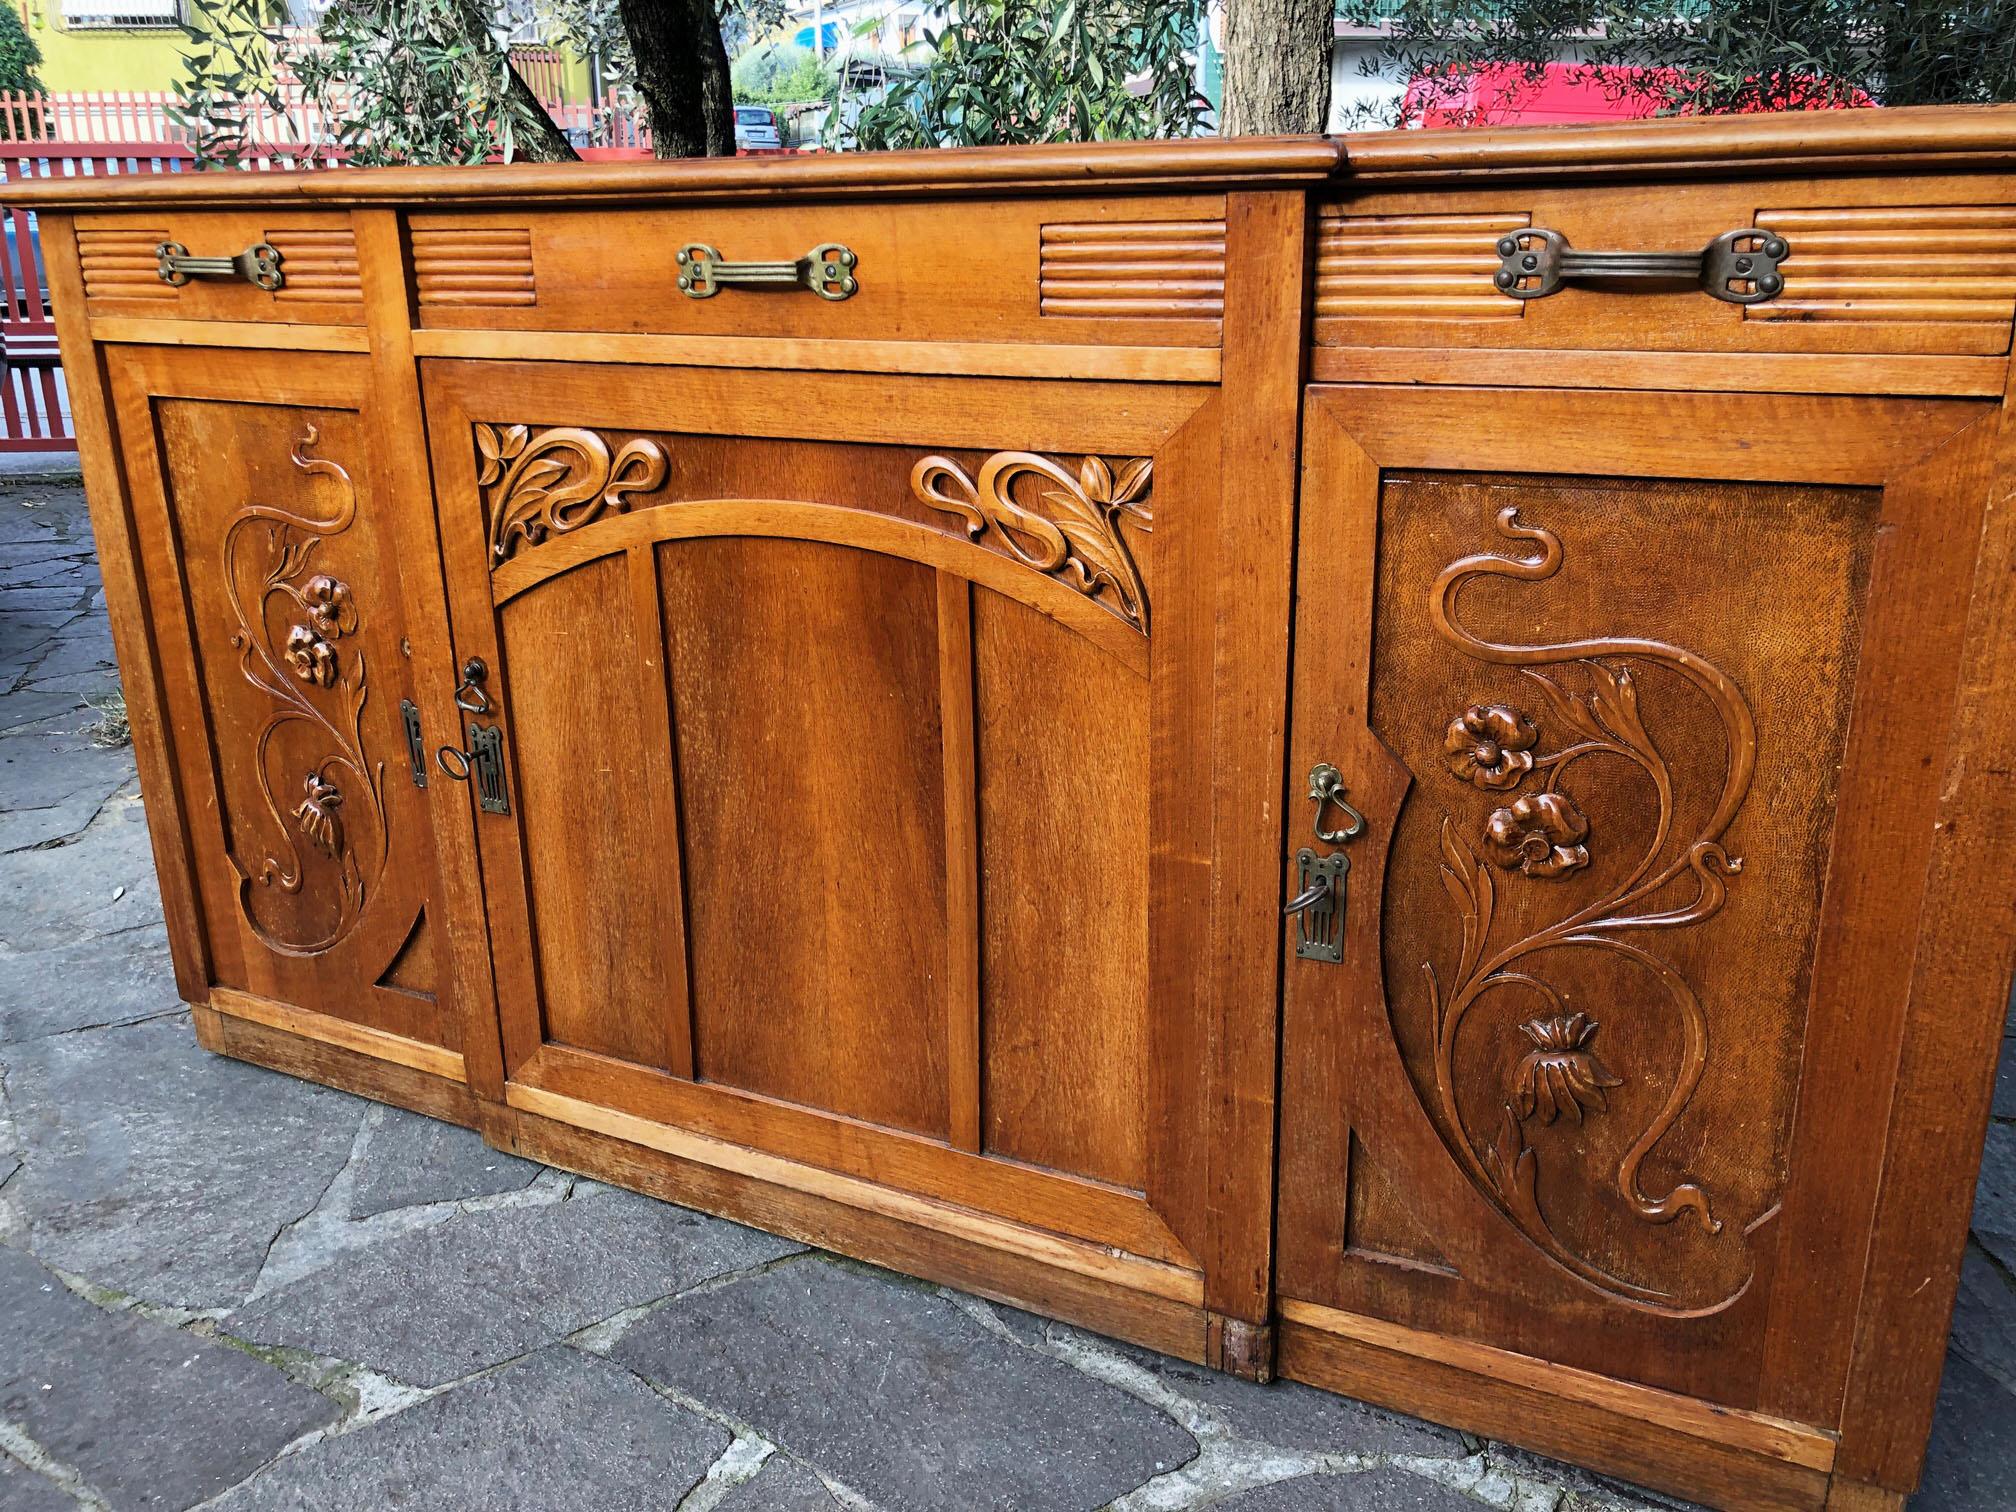 Original Italian Art Noveau Sideboard in Honey-Colored Walnut with Three Drawers For Sale 2